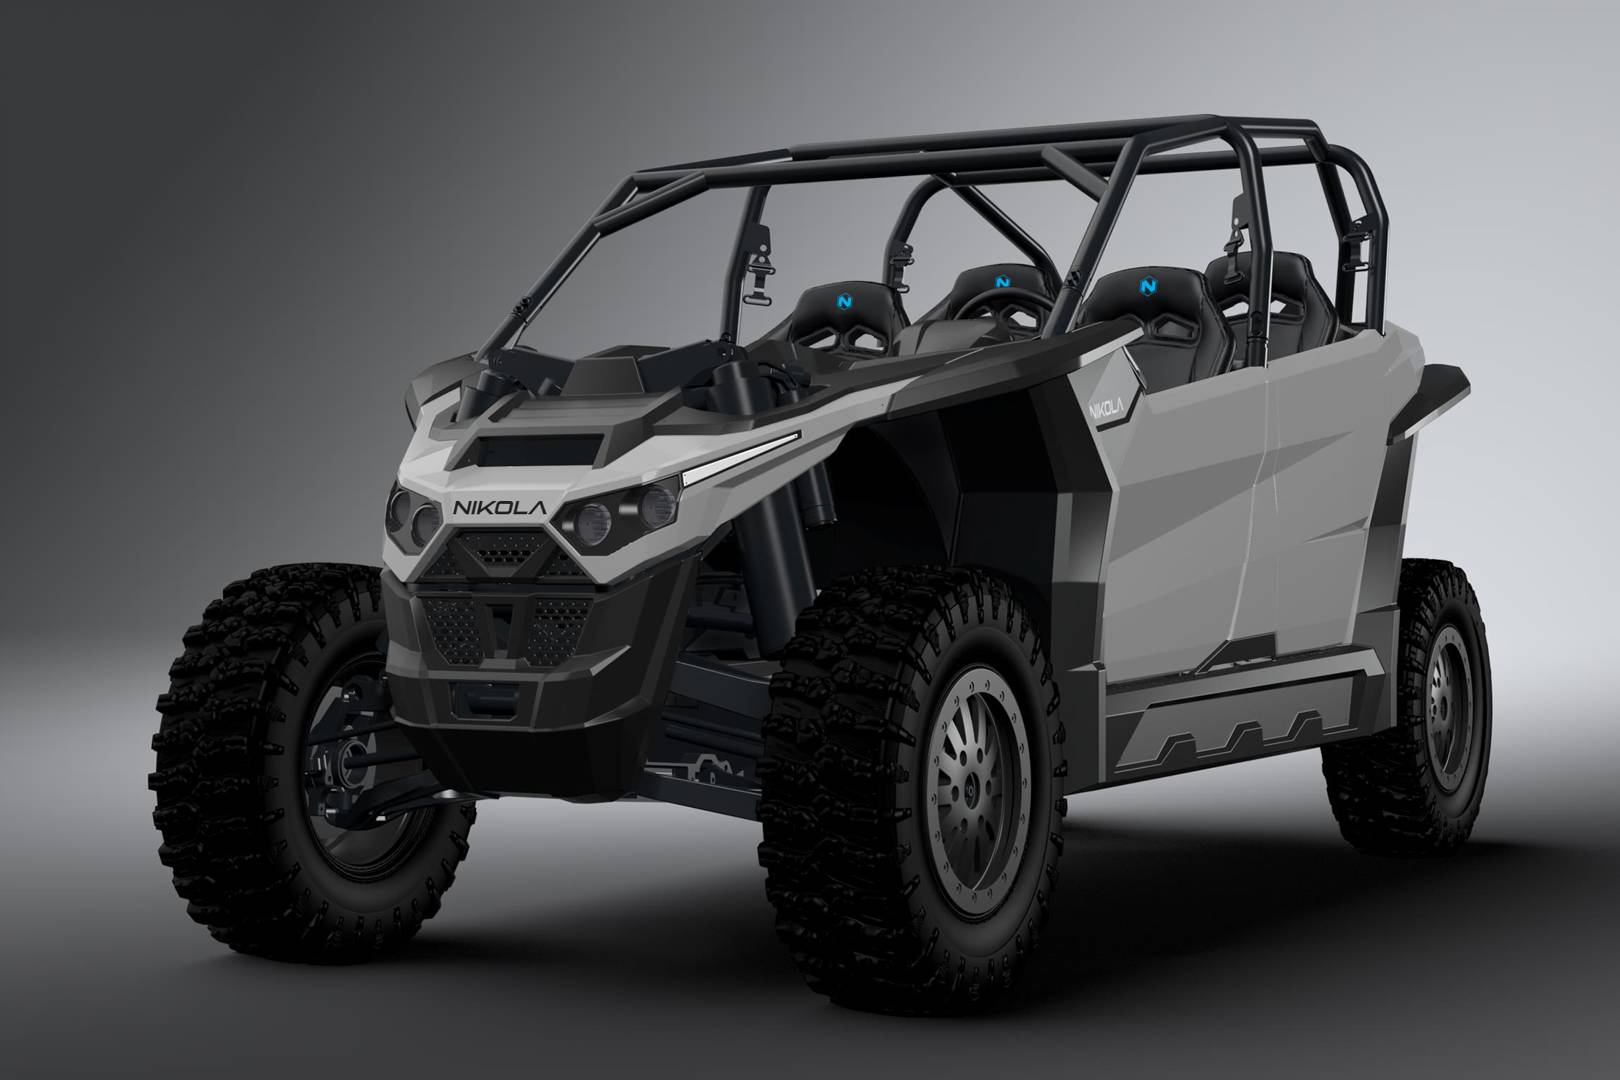 This ridiculous $35,000 electric off-roader out-torques tanks